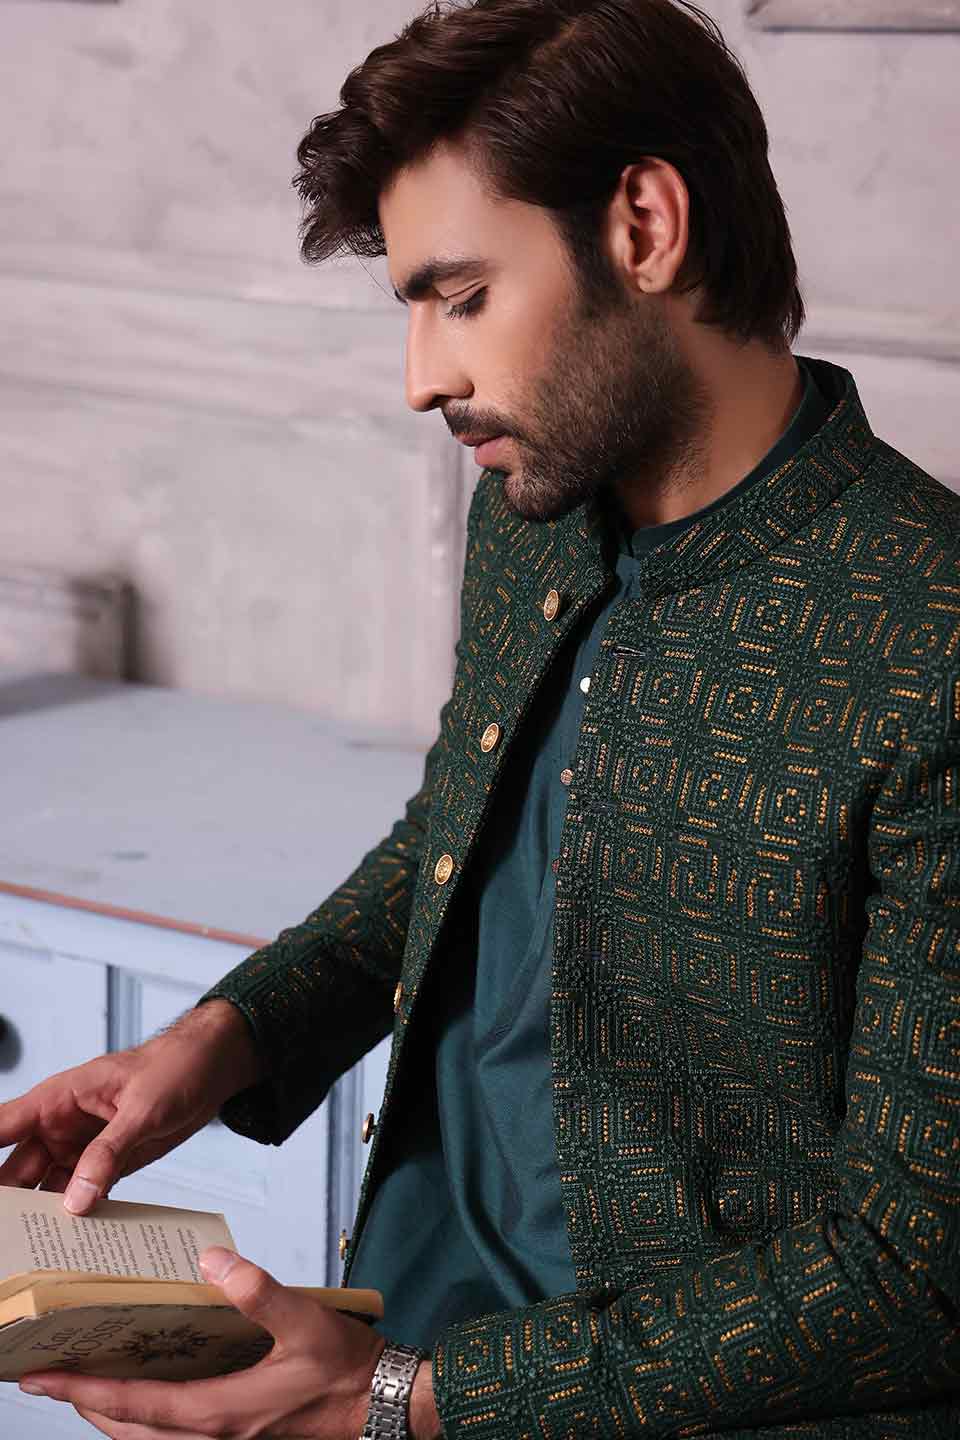 Prince Coat Green Embroidered